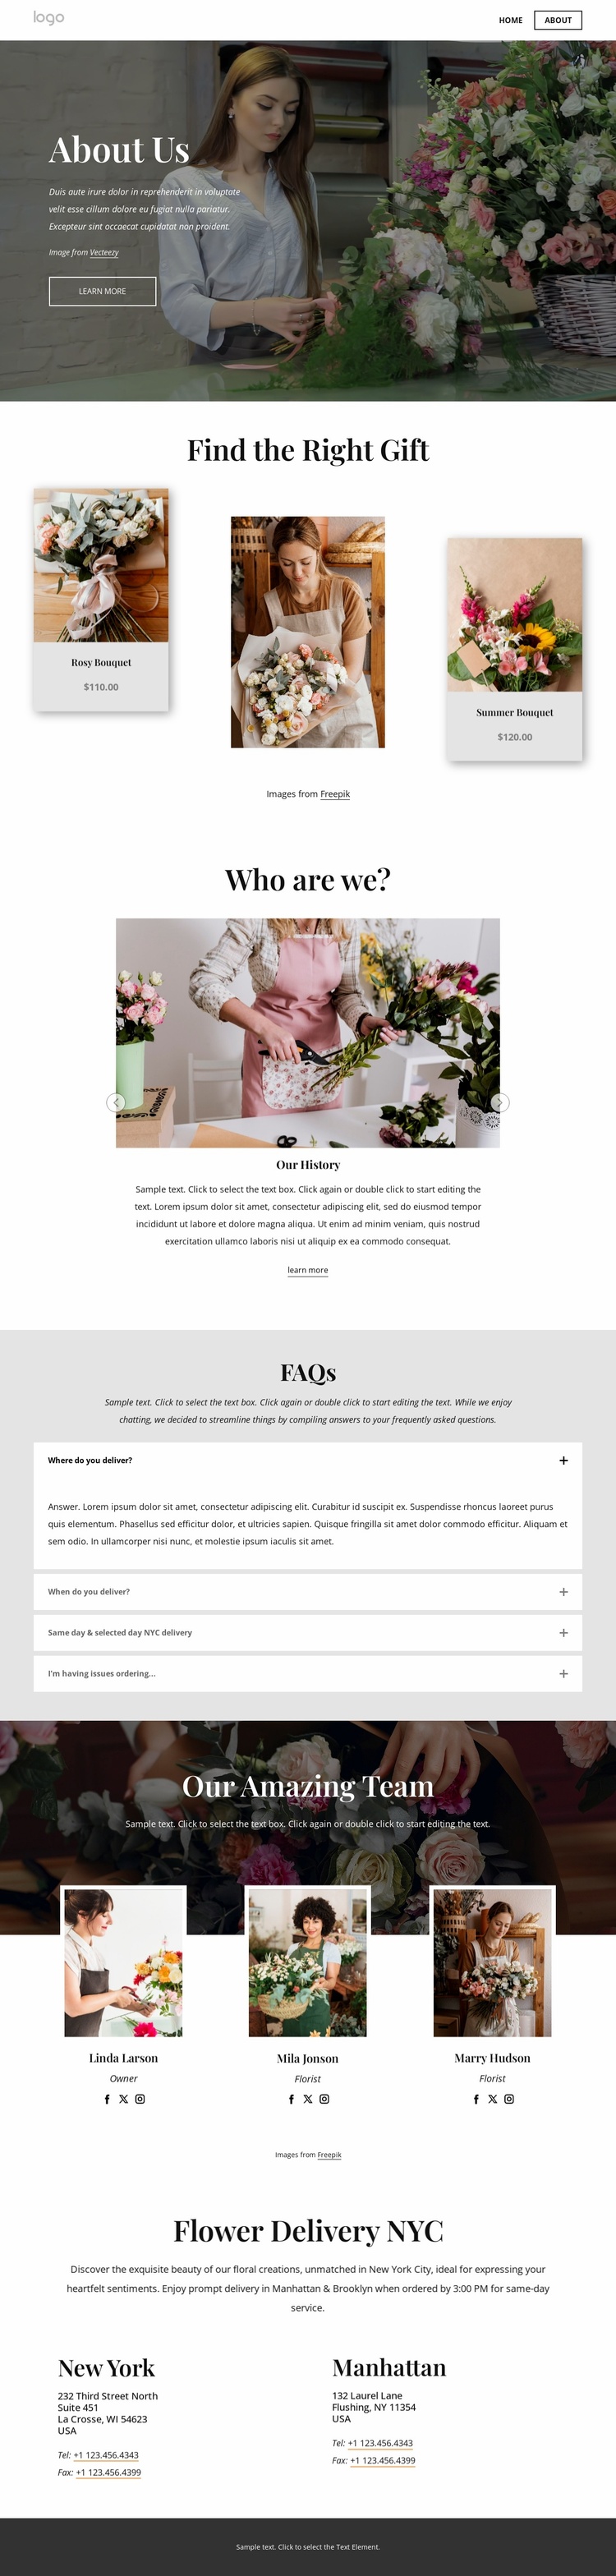 Same day flower delivery Landing Page